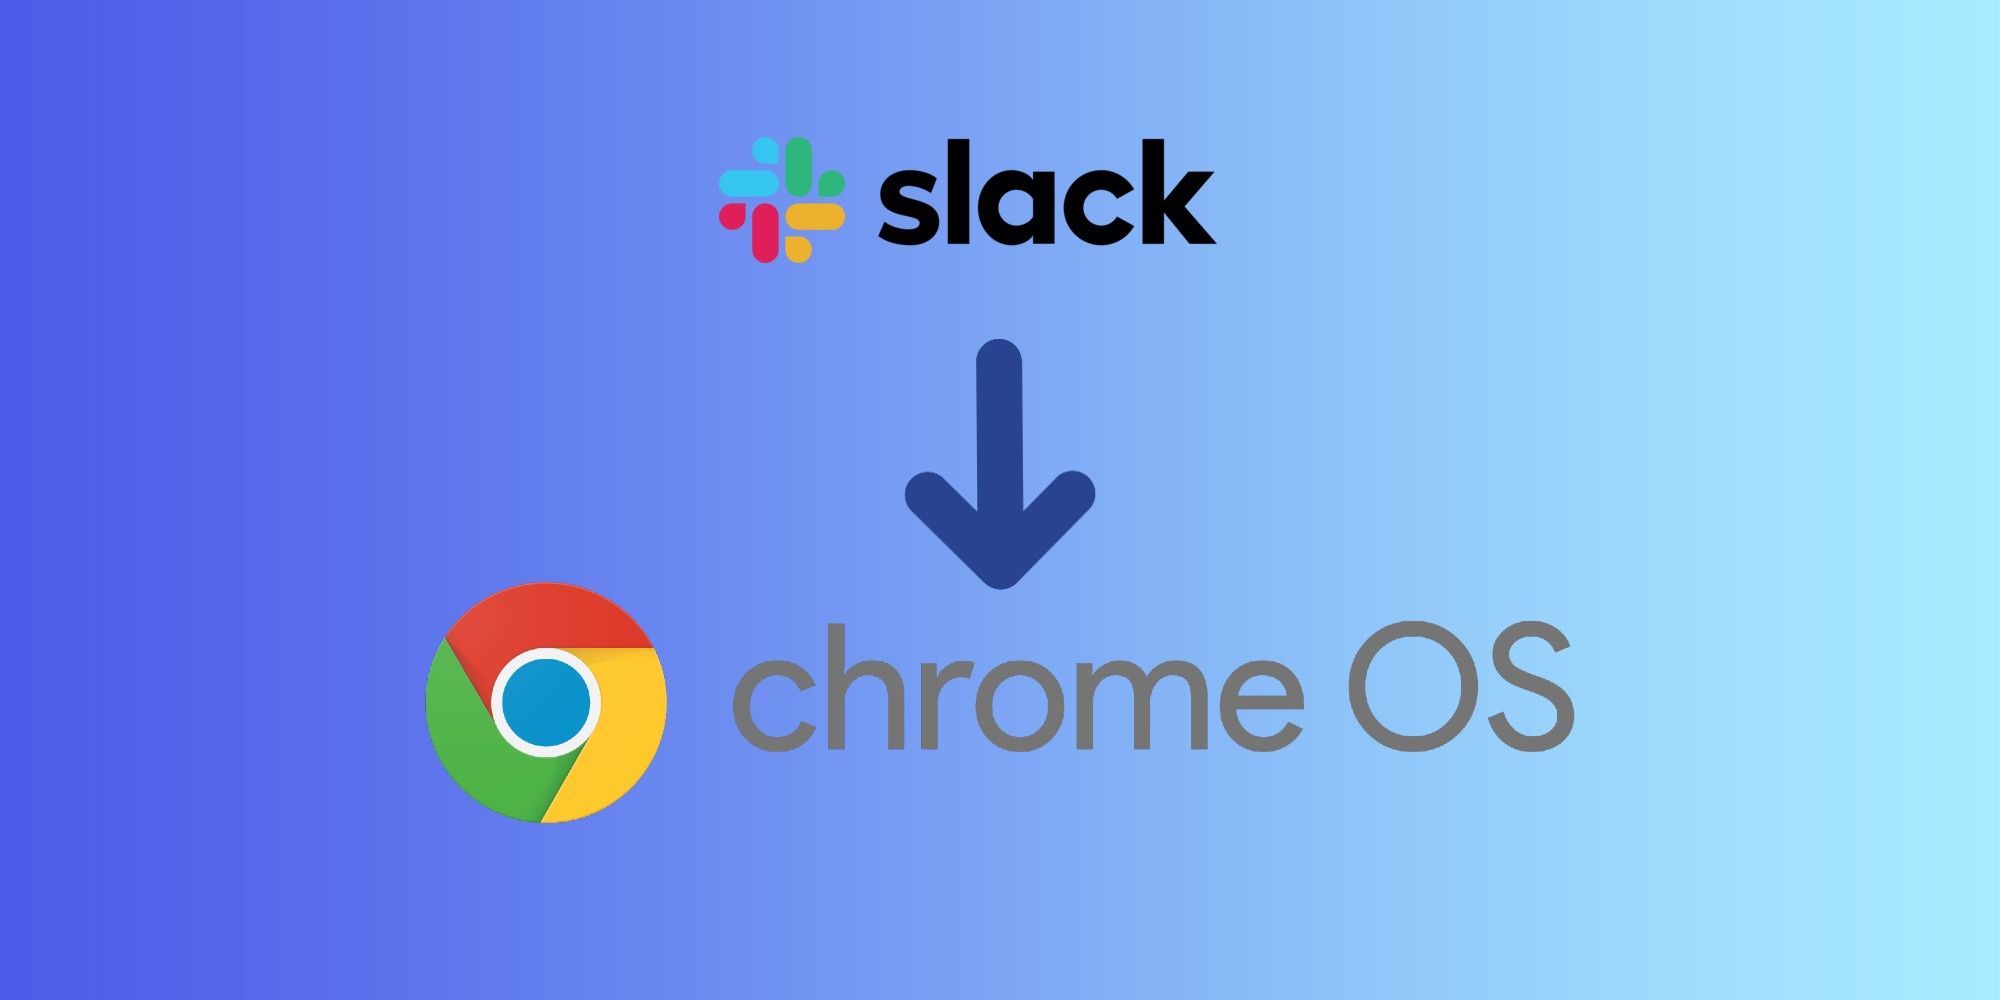 The Slack android app isn't available on Chrome OS